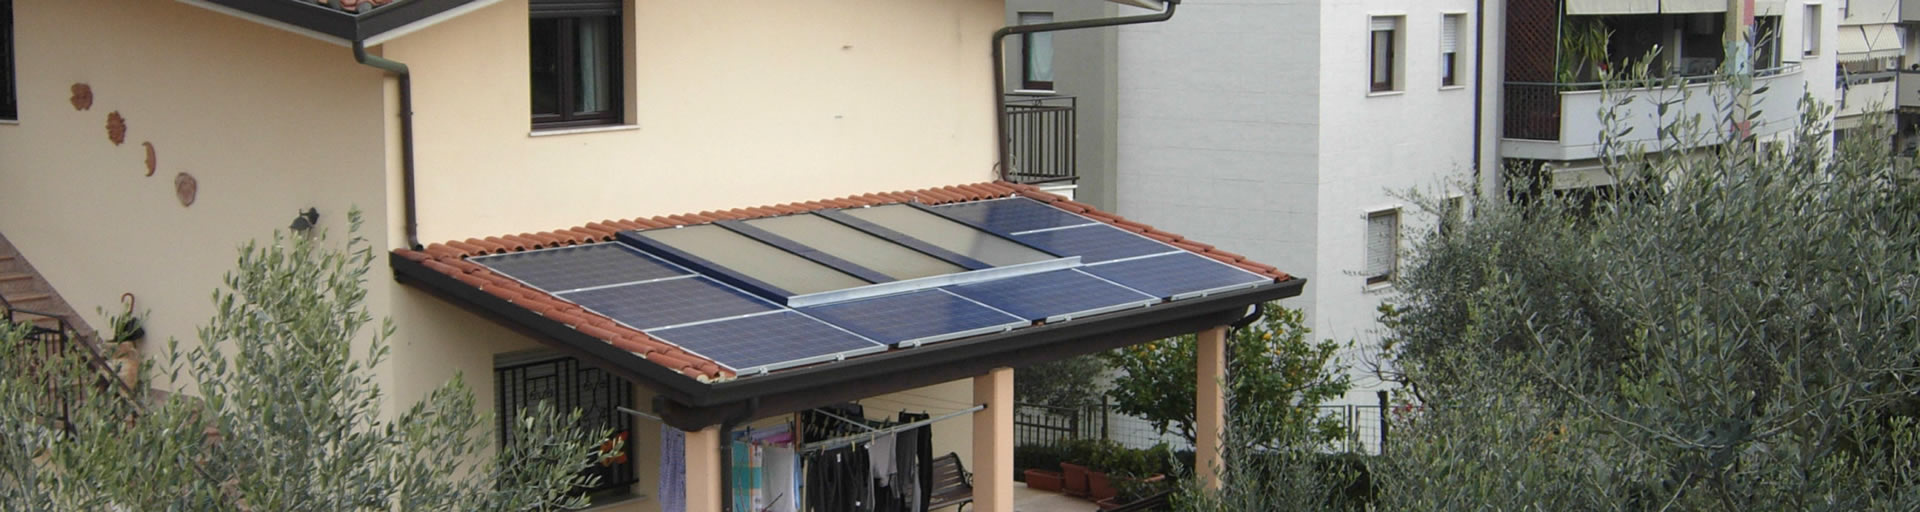 Integrated solar heating and photovoltaics on roof